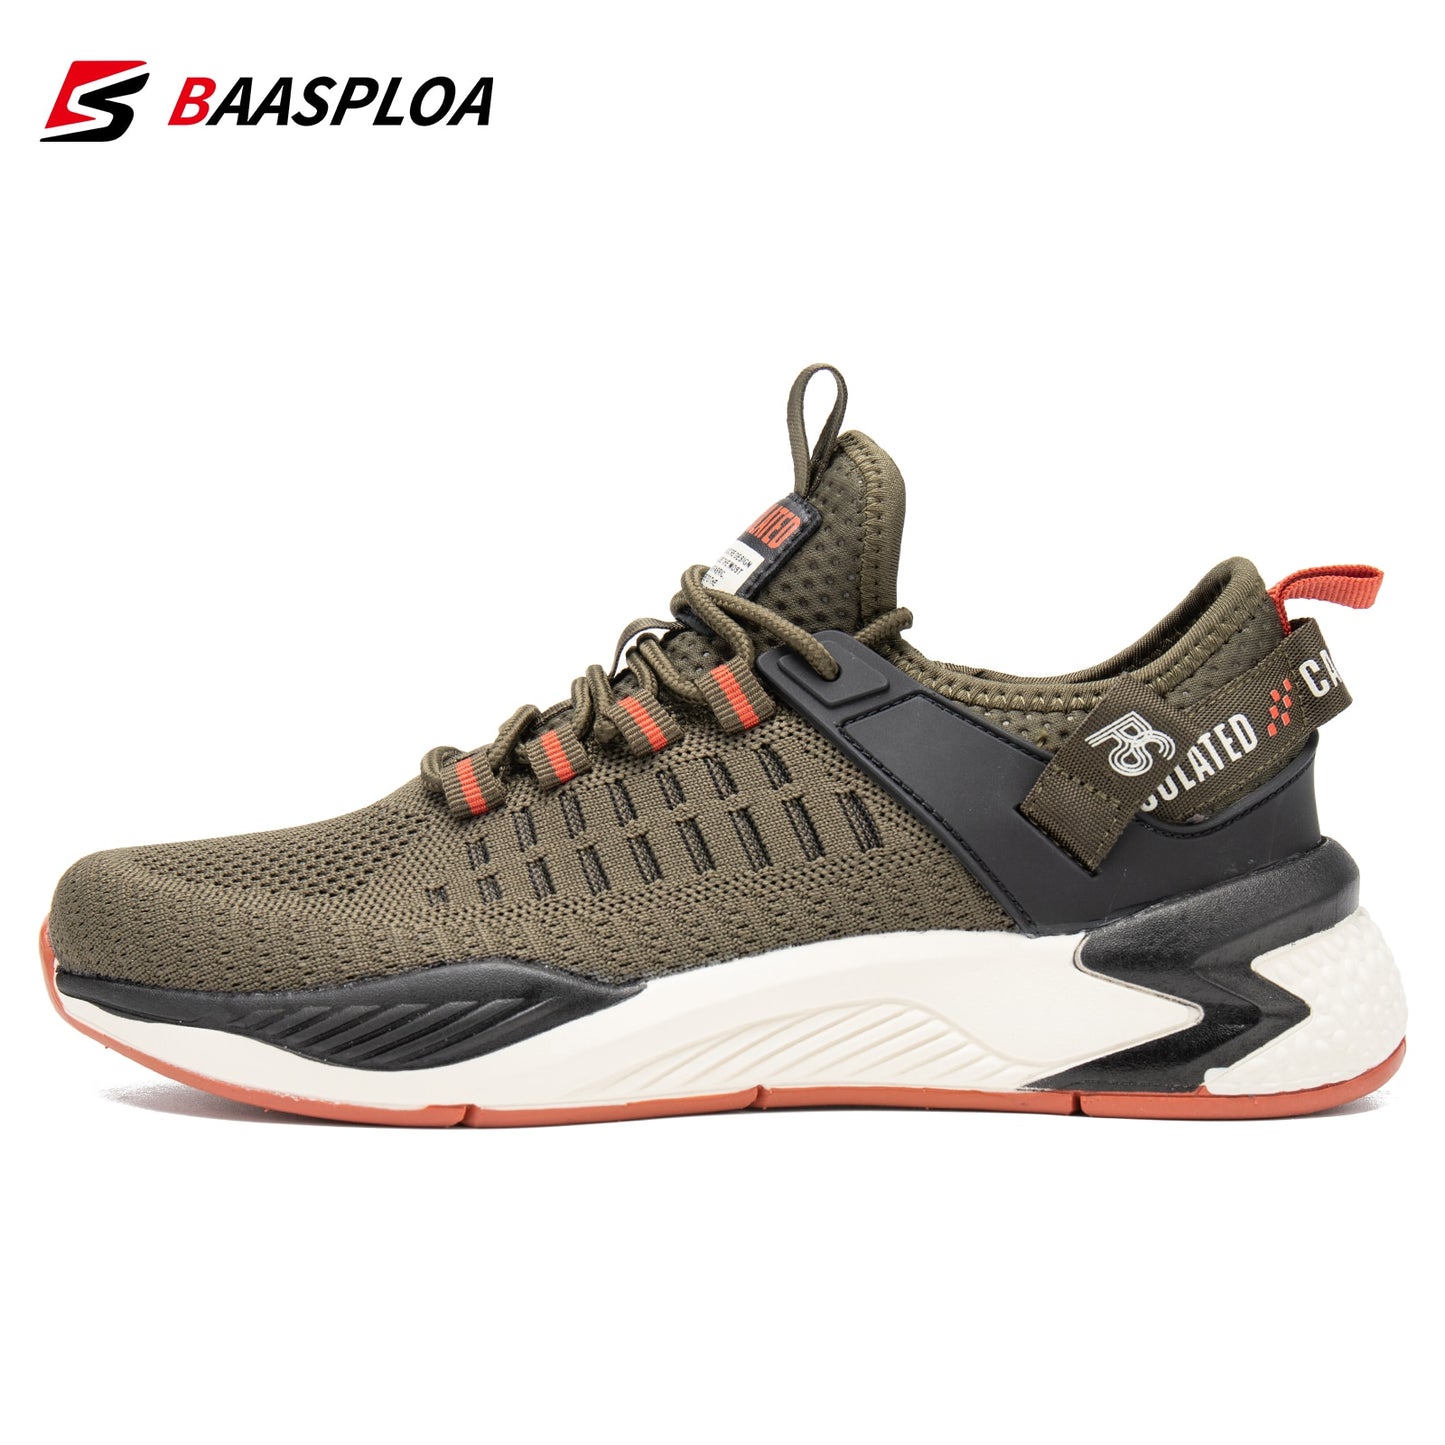 Men Running Shoes Non-slip Shock Absorption Sneaker Lightweight Tennis Shoe Breathable Casual Shoes The Clothing Company Sydney